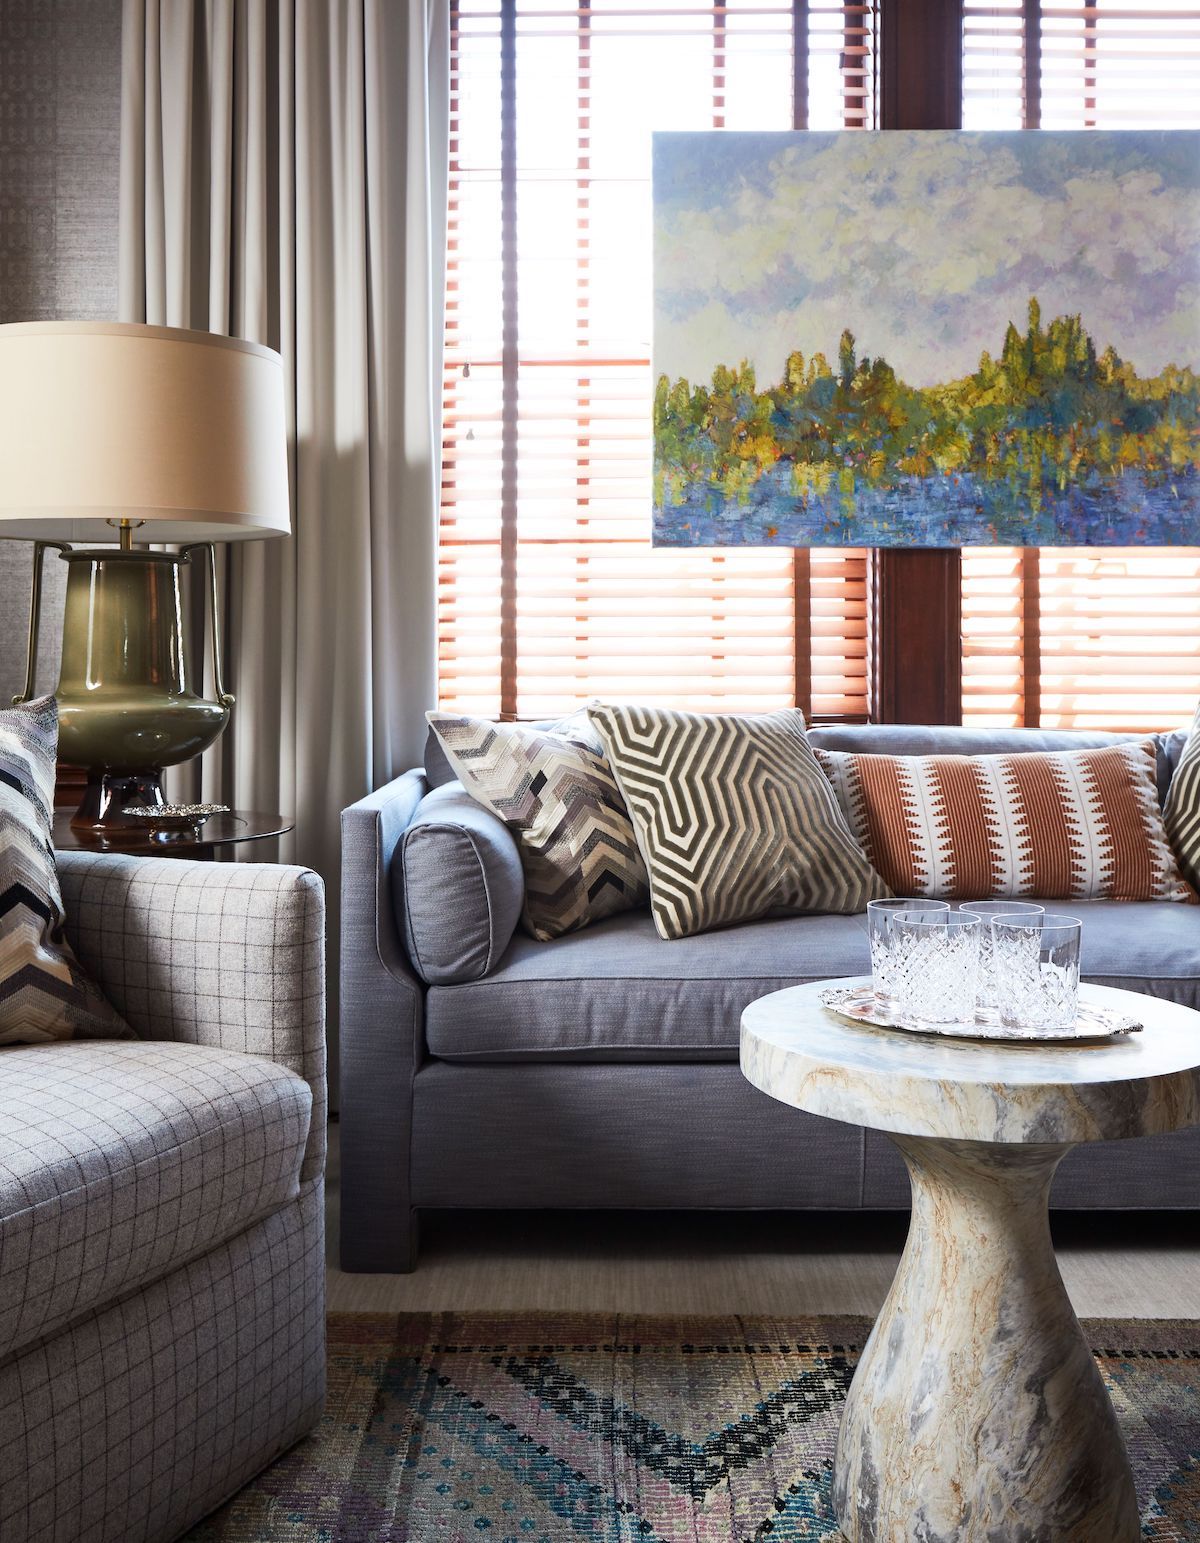 A contemporary blue sofa cozies up to a traditional plaid swivel chair while a marble coffee table exudes both modern and classic sophistication. Colorful accents come in through the art, rug, and geometric pillows.